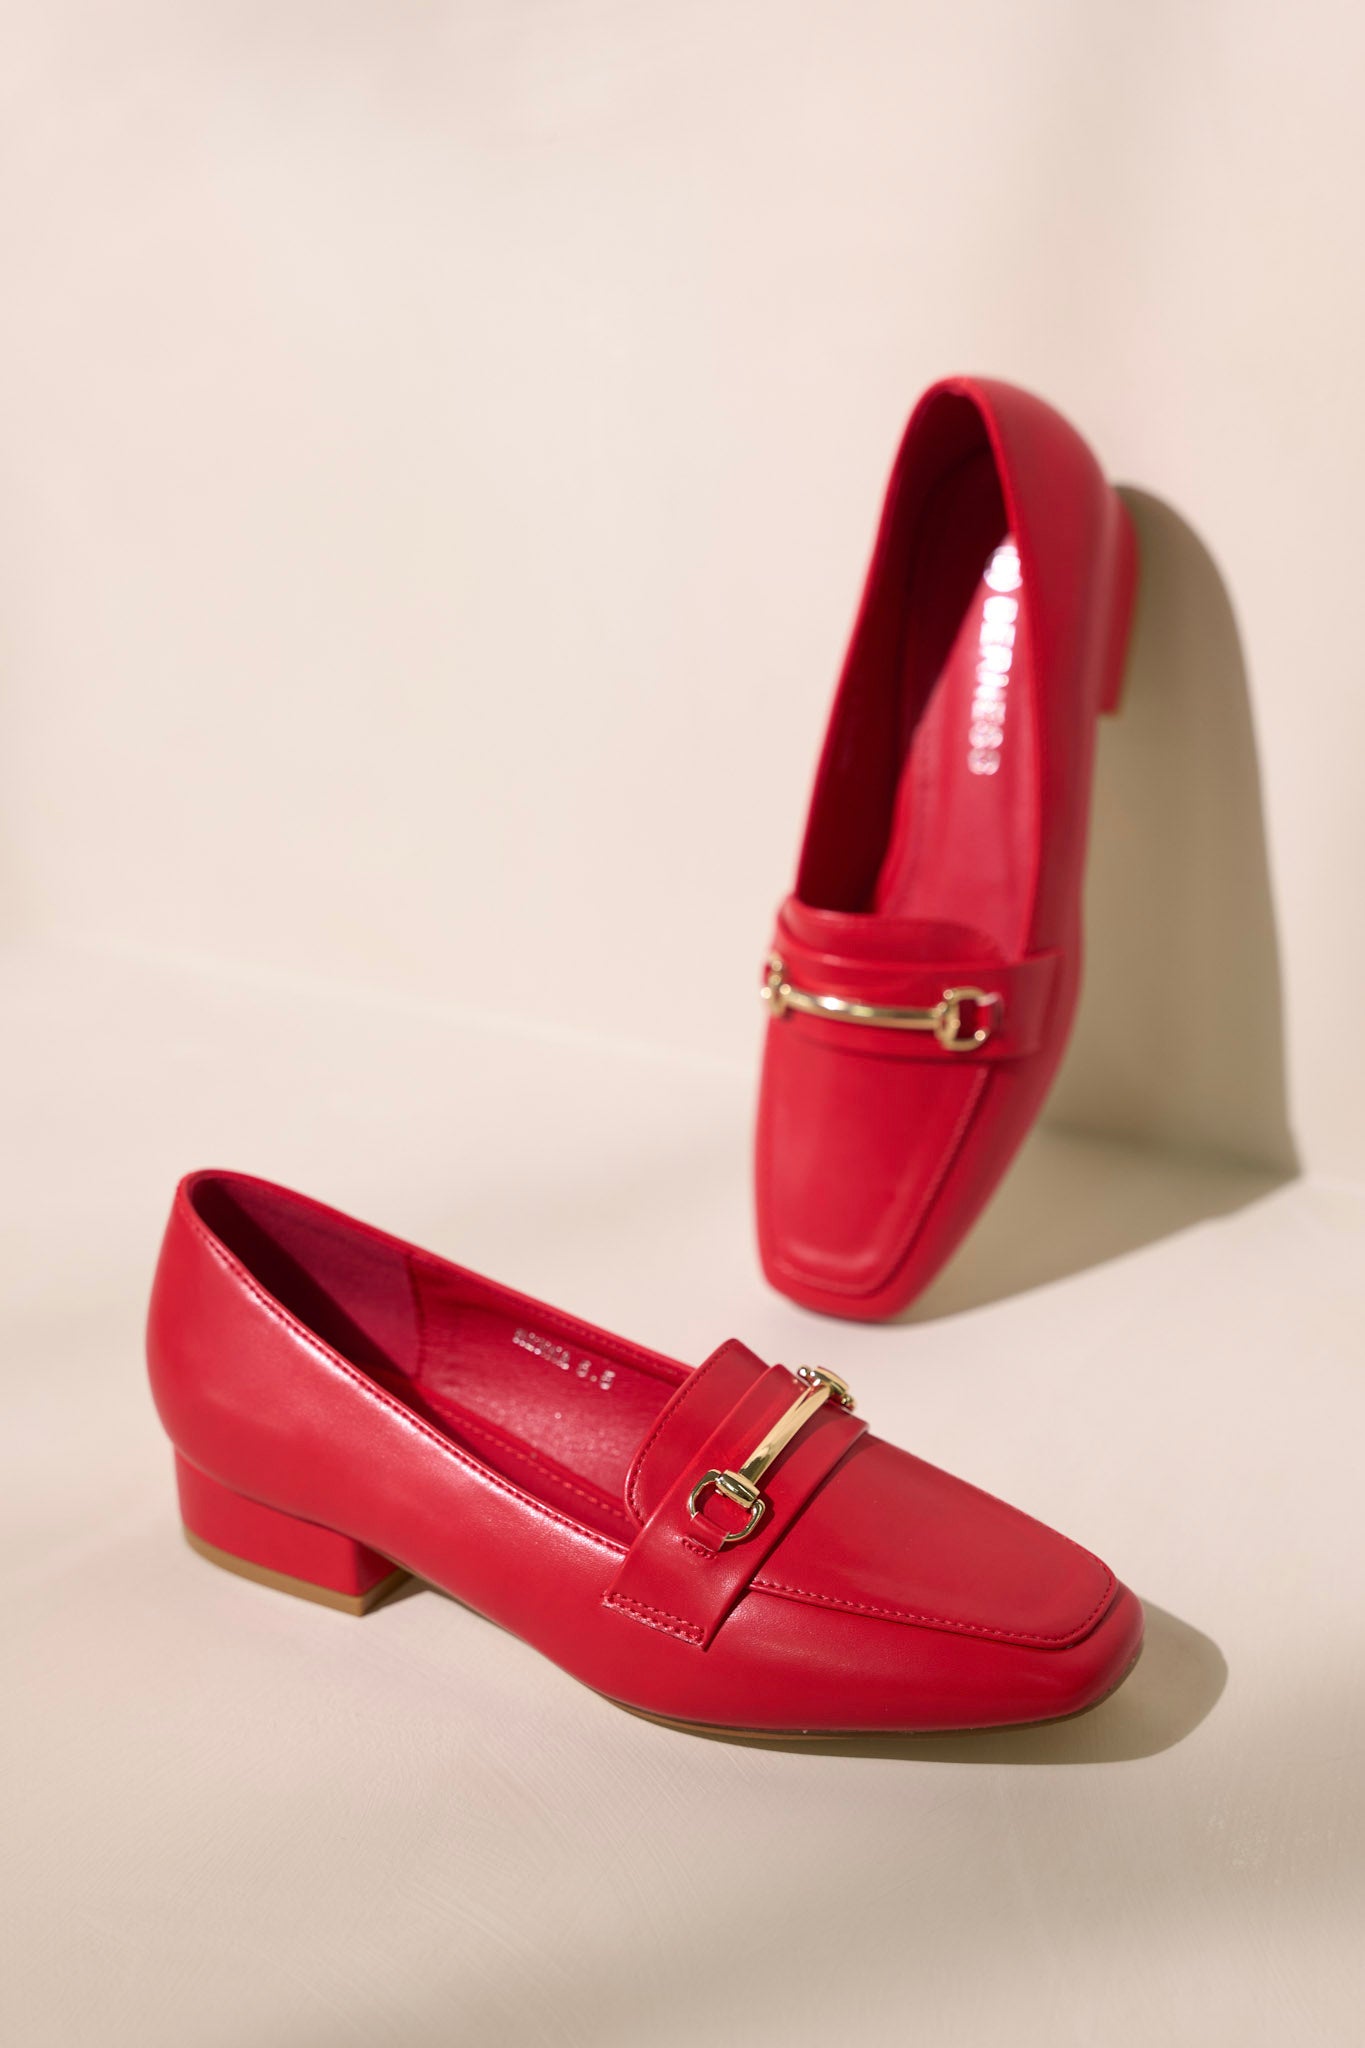 Side view of these red loafers that feature a slip on design, a small heel, a square toe, and gold hardware.